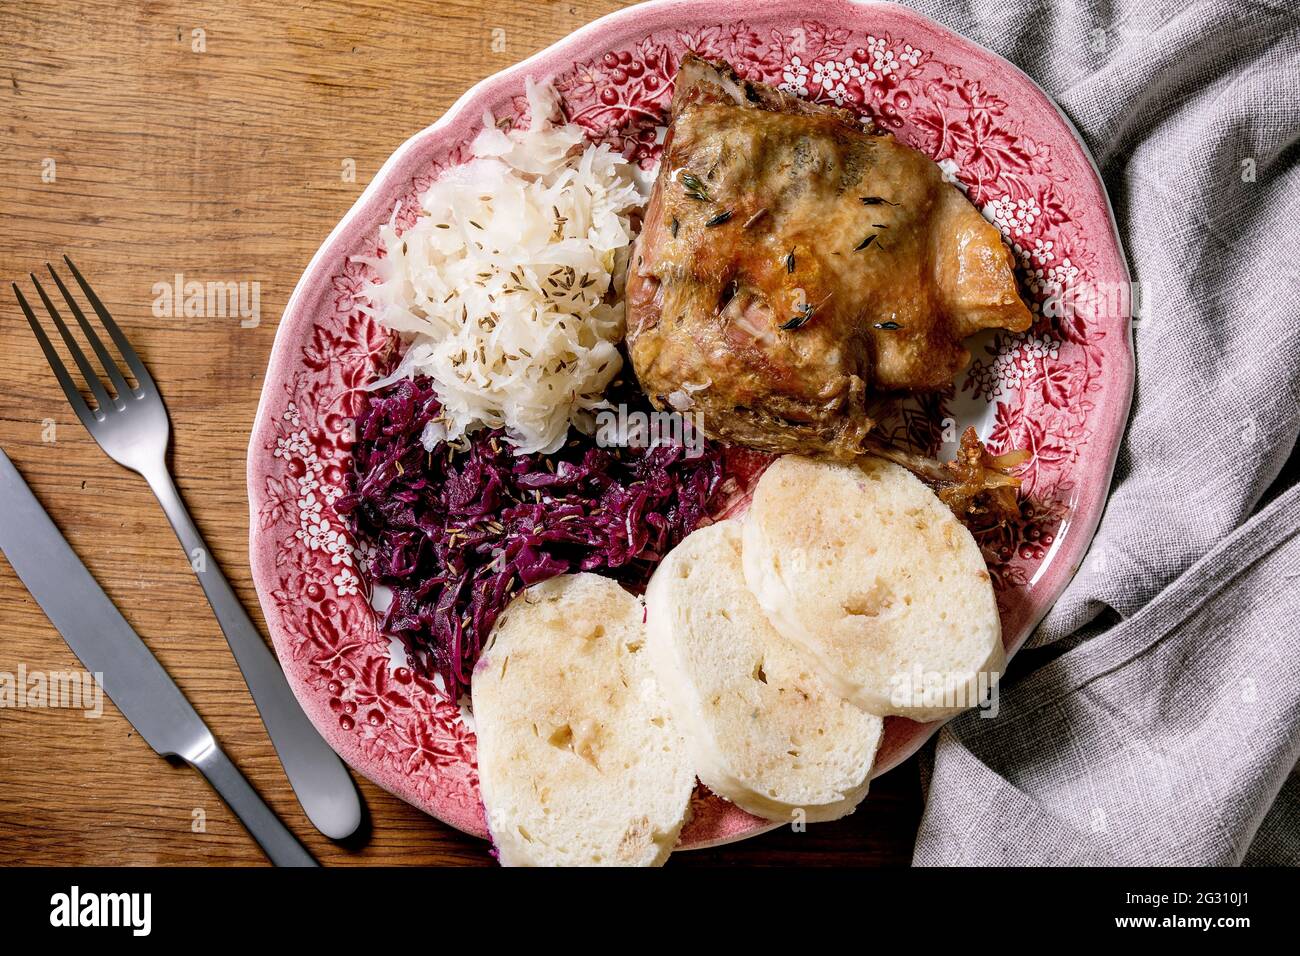 Baked duck legs with sliced boiled bread knedliks, sauerkraut in ceramic plate, decorated with napkin over brown wooden background. Traditional Czech, Stock Photo